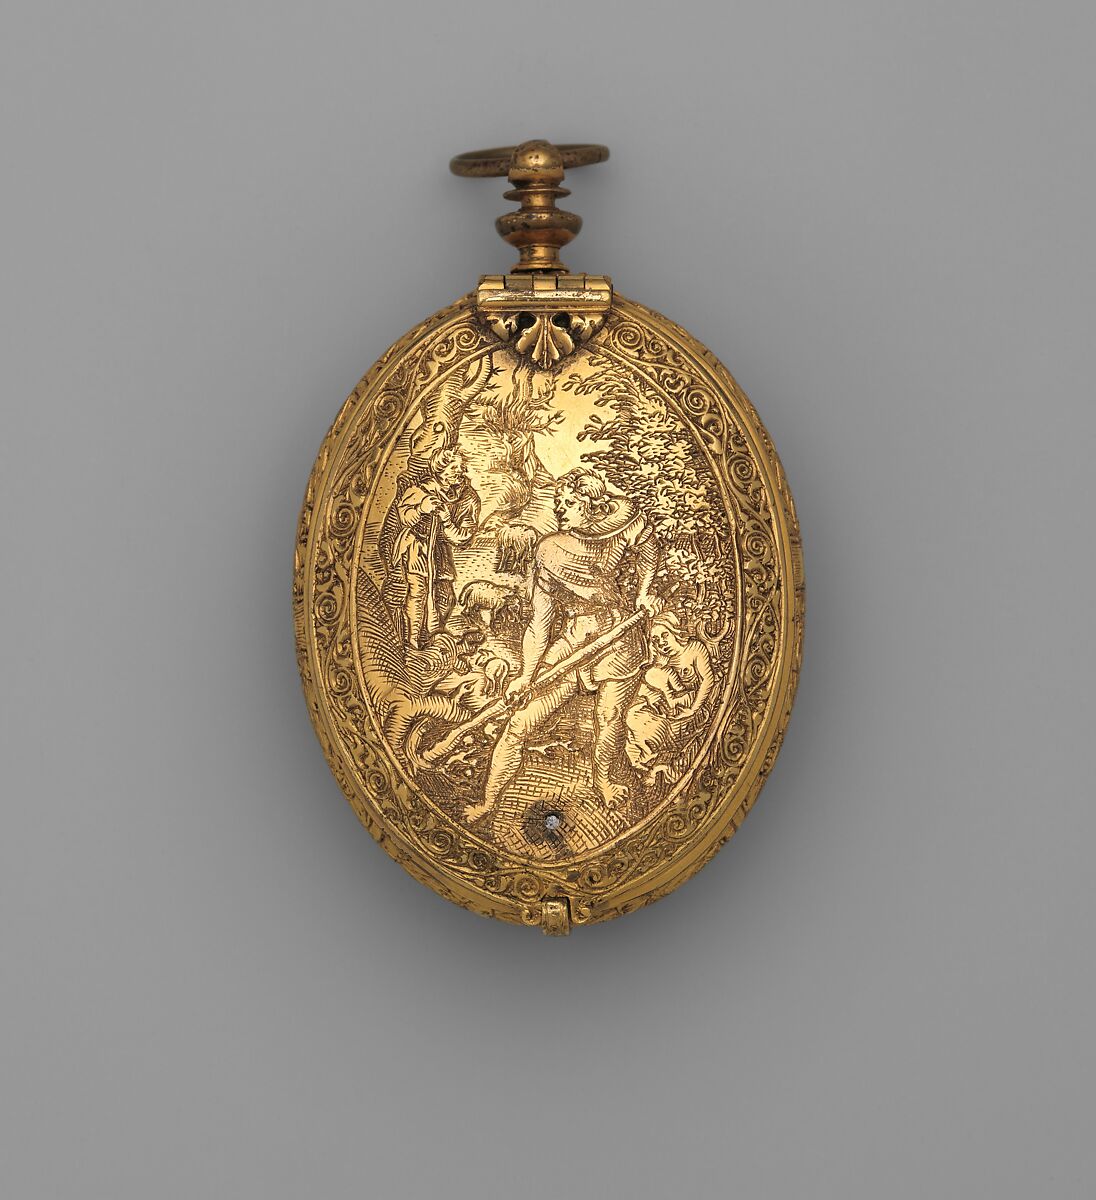 Watch, Watchmaker: W.A., Case and dial: gilded brass; Movement: gilded brass and polished steel, Flemish, Antwerp or possibly Ghent 